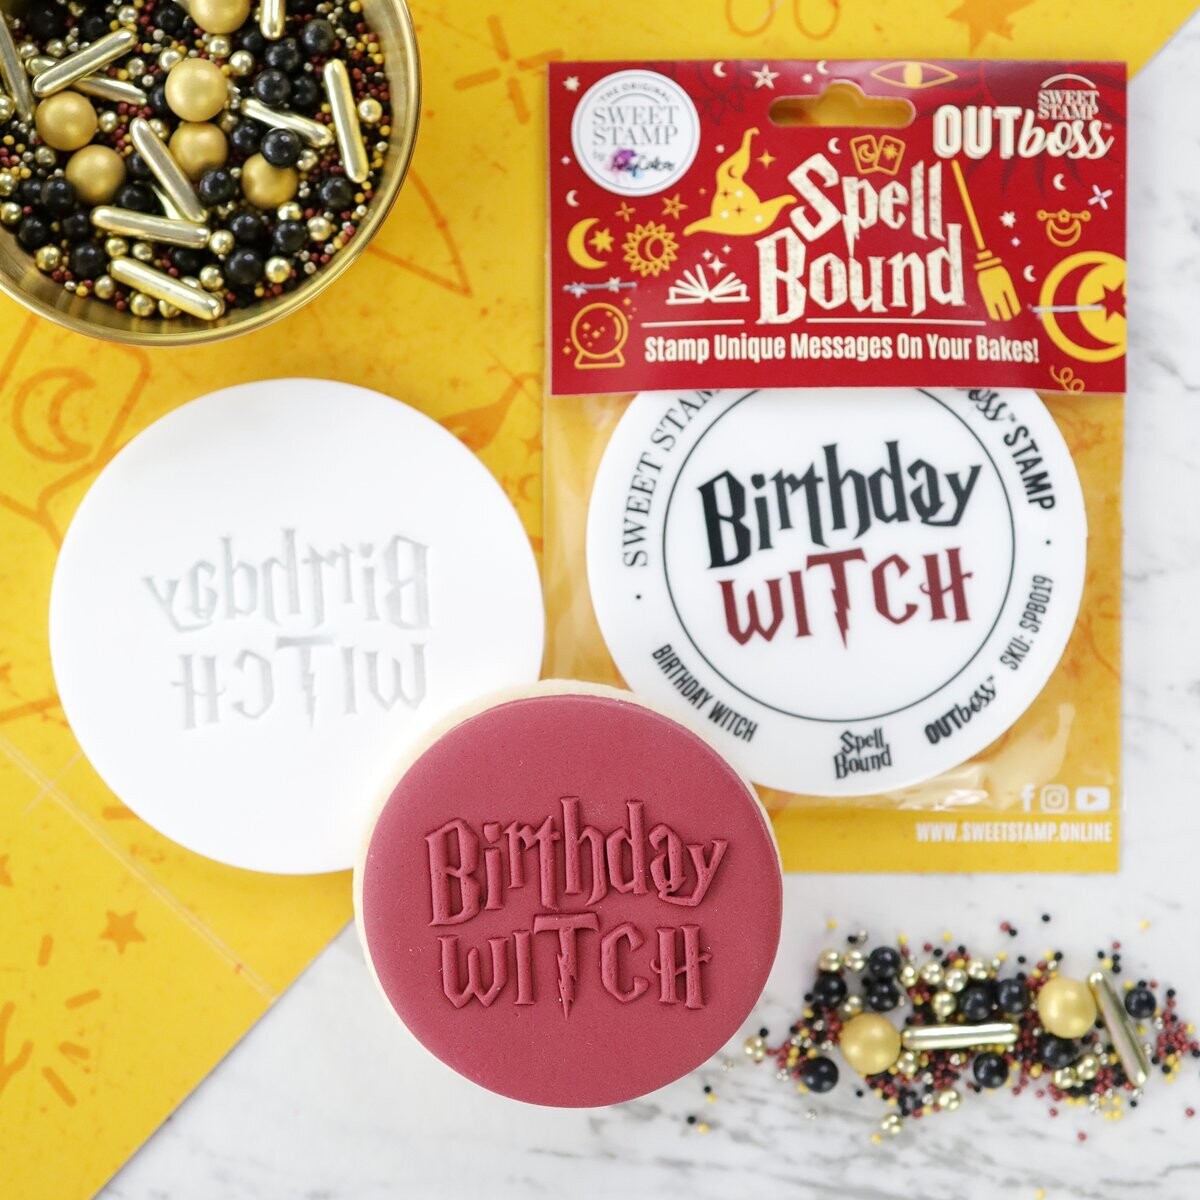 Sweet Stamp -OUTboss Spellbound -BIRTHDAY WITCH - Σφραγίδα με γράμματα Harry Potter